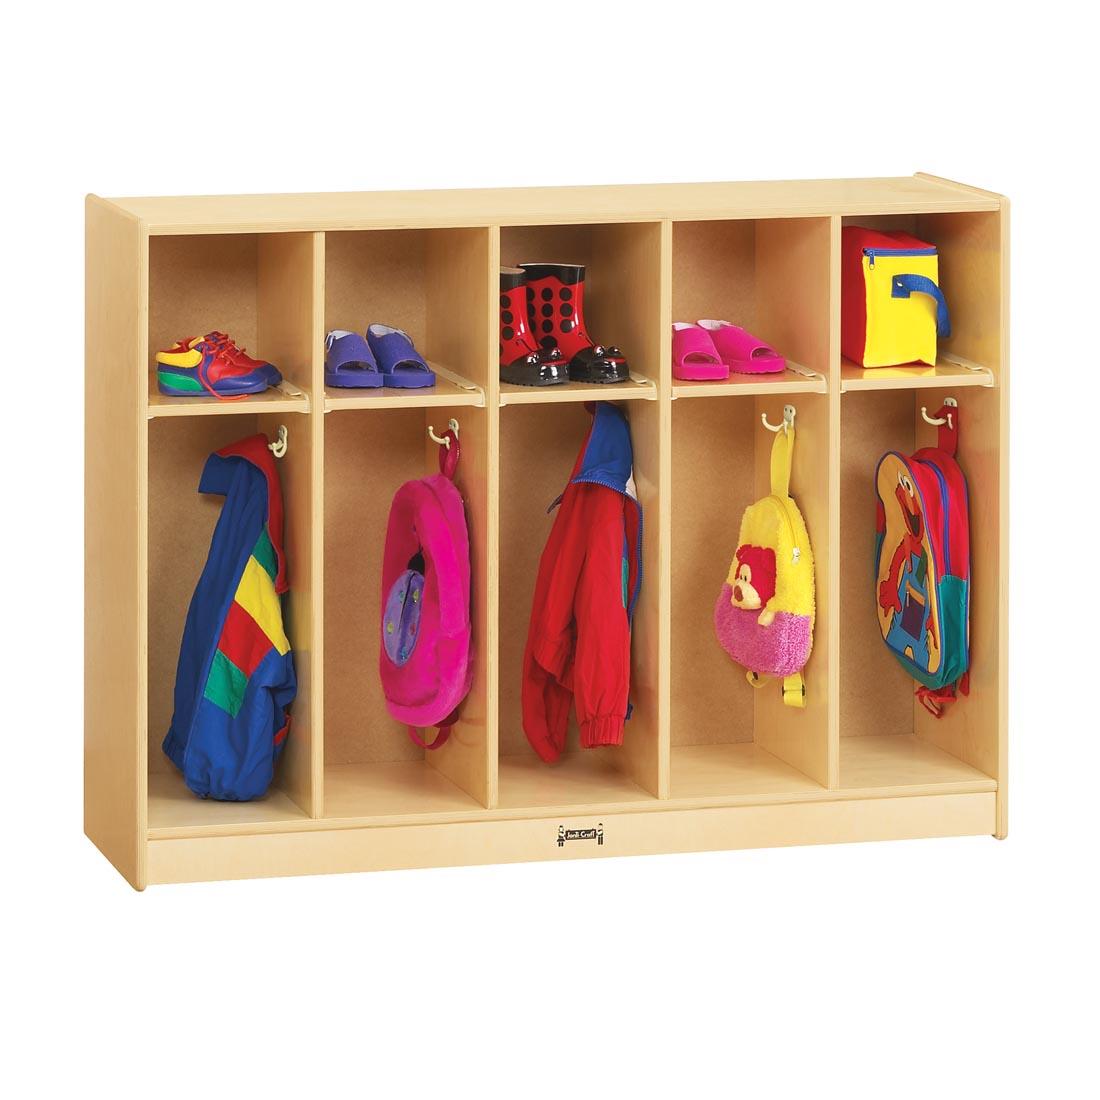 Toddler Coat Locker shown with suggested storage contents